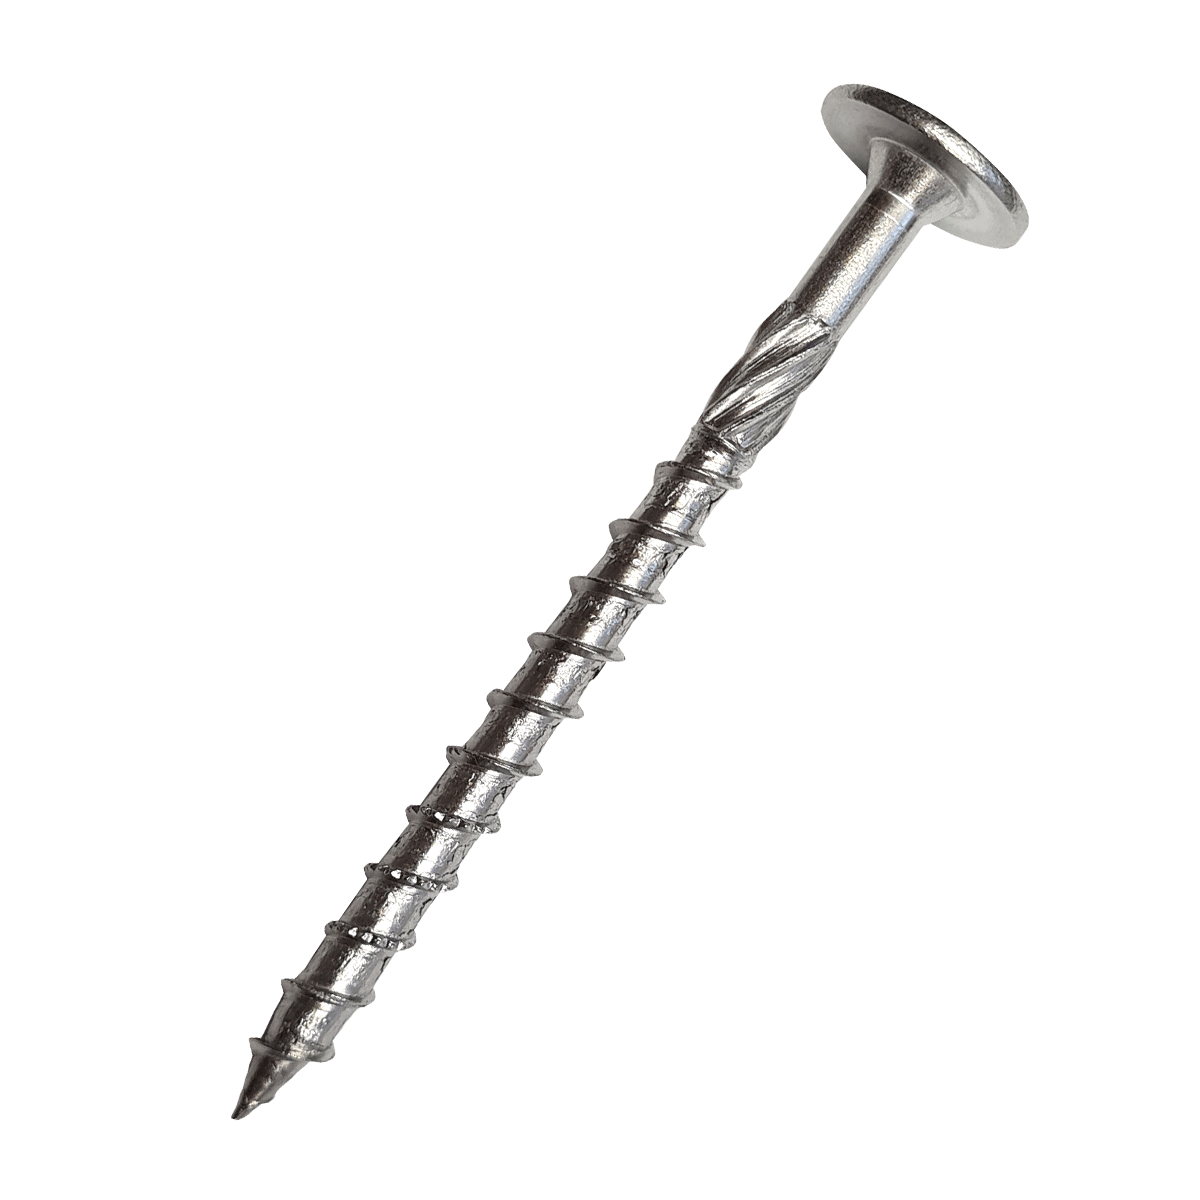 A2 stainless steel, Torx, wafer head timber screws form Fusion Fixings 